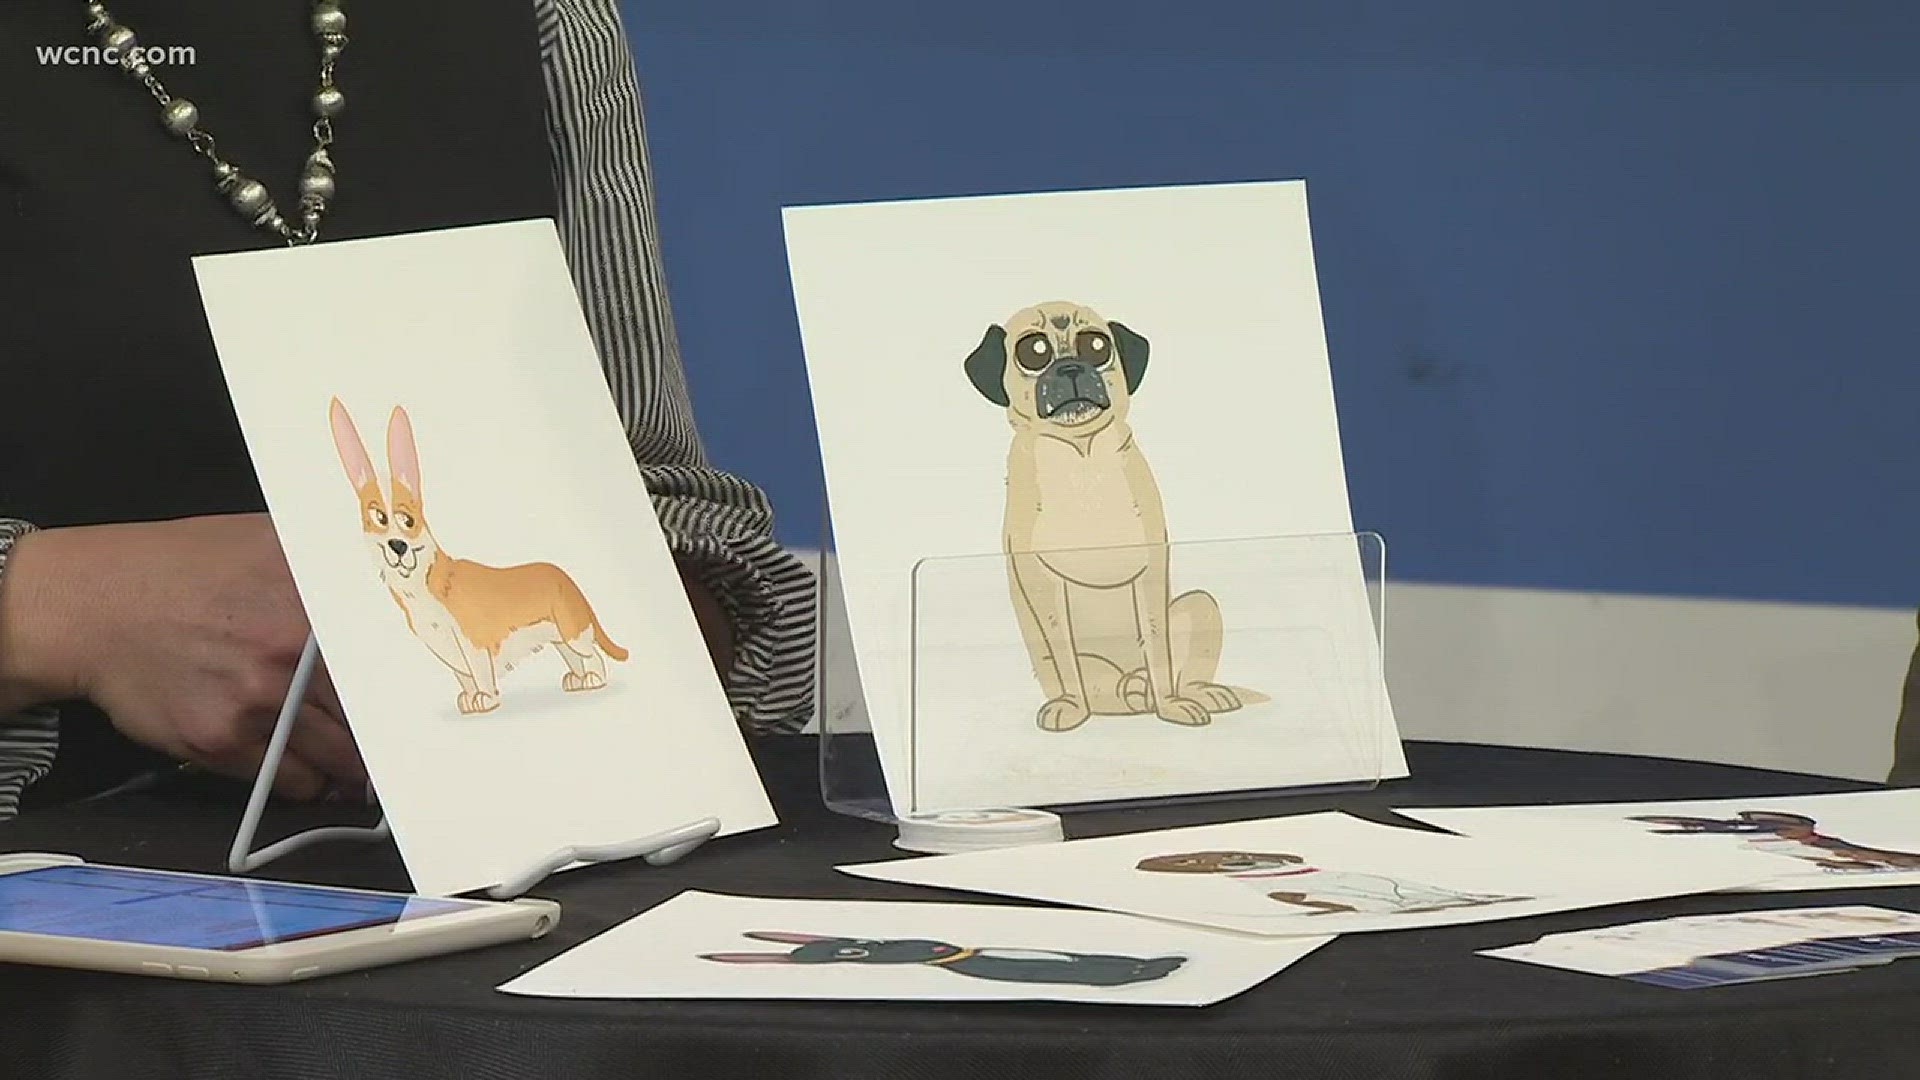 Austin Light will draw a wonder picture of your dog